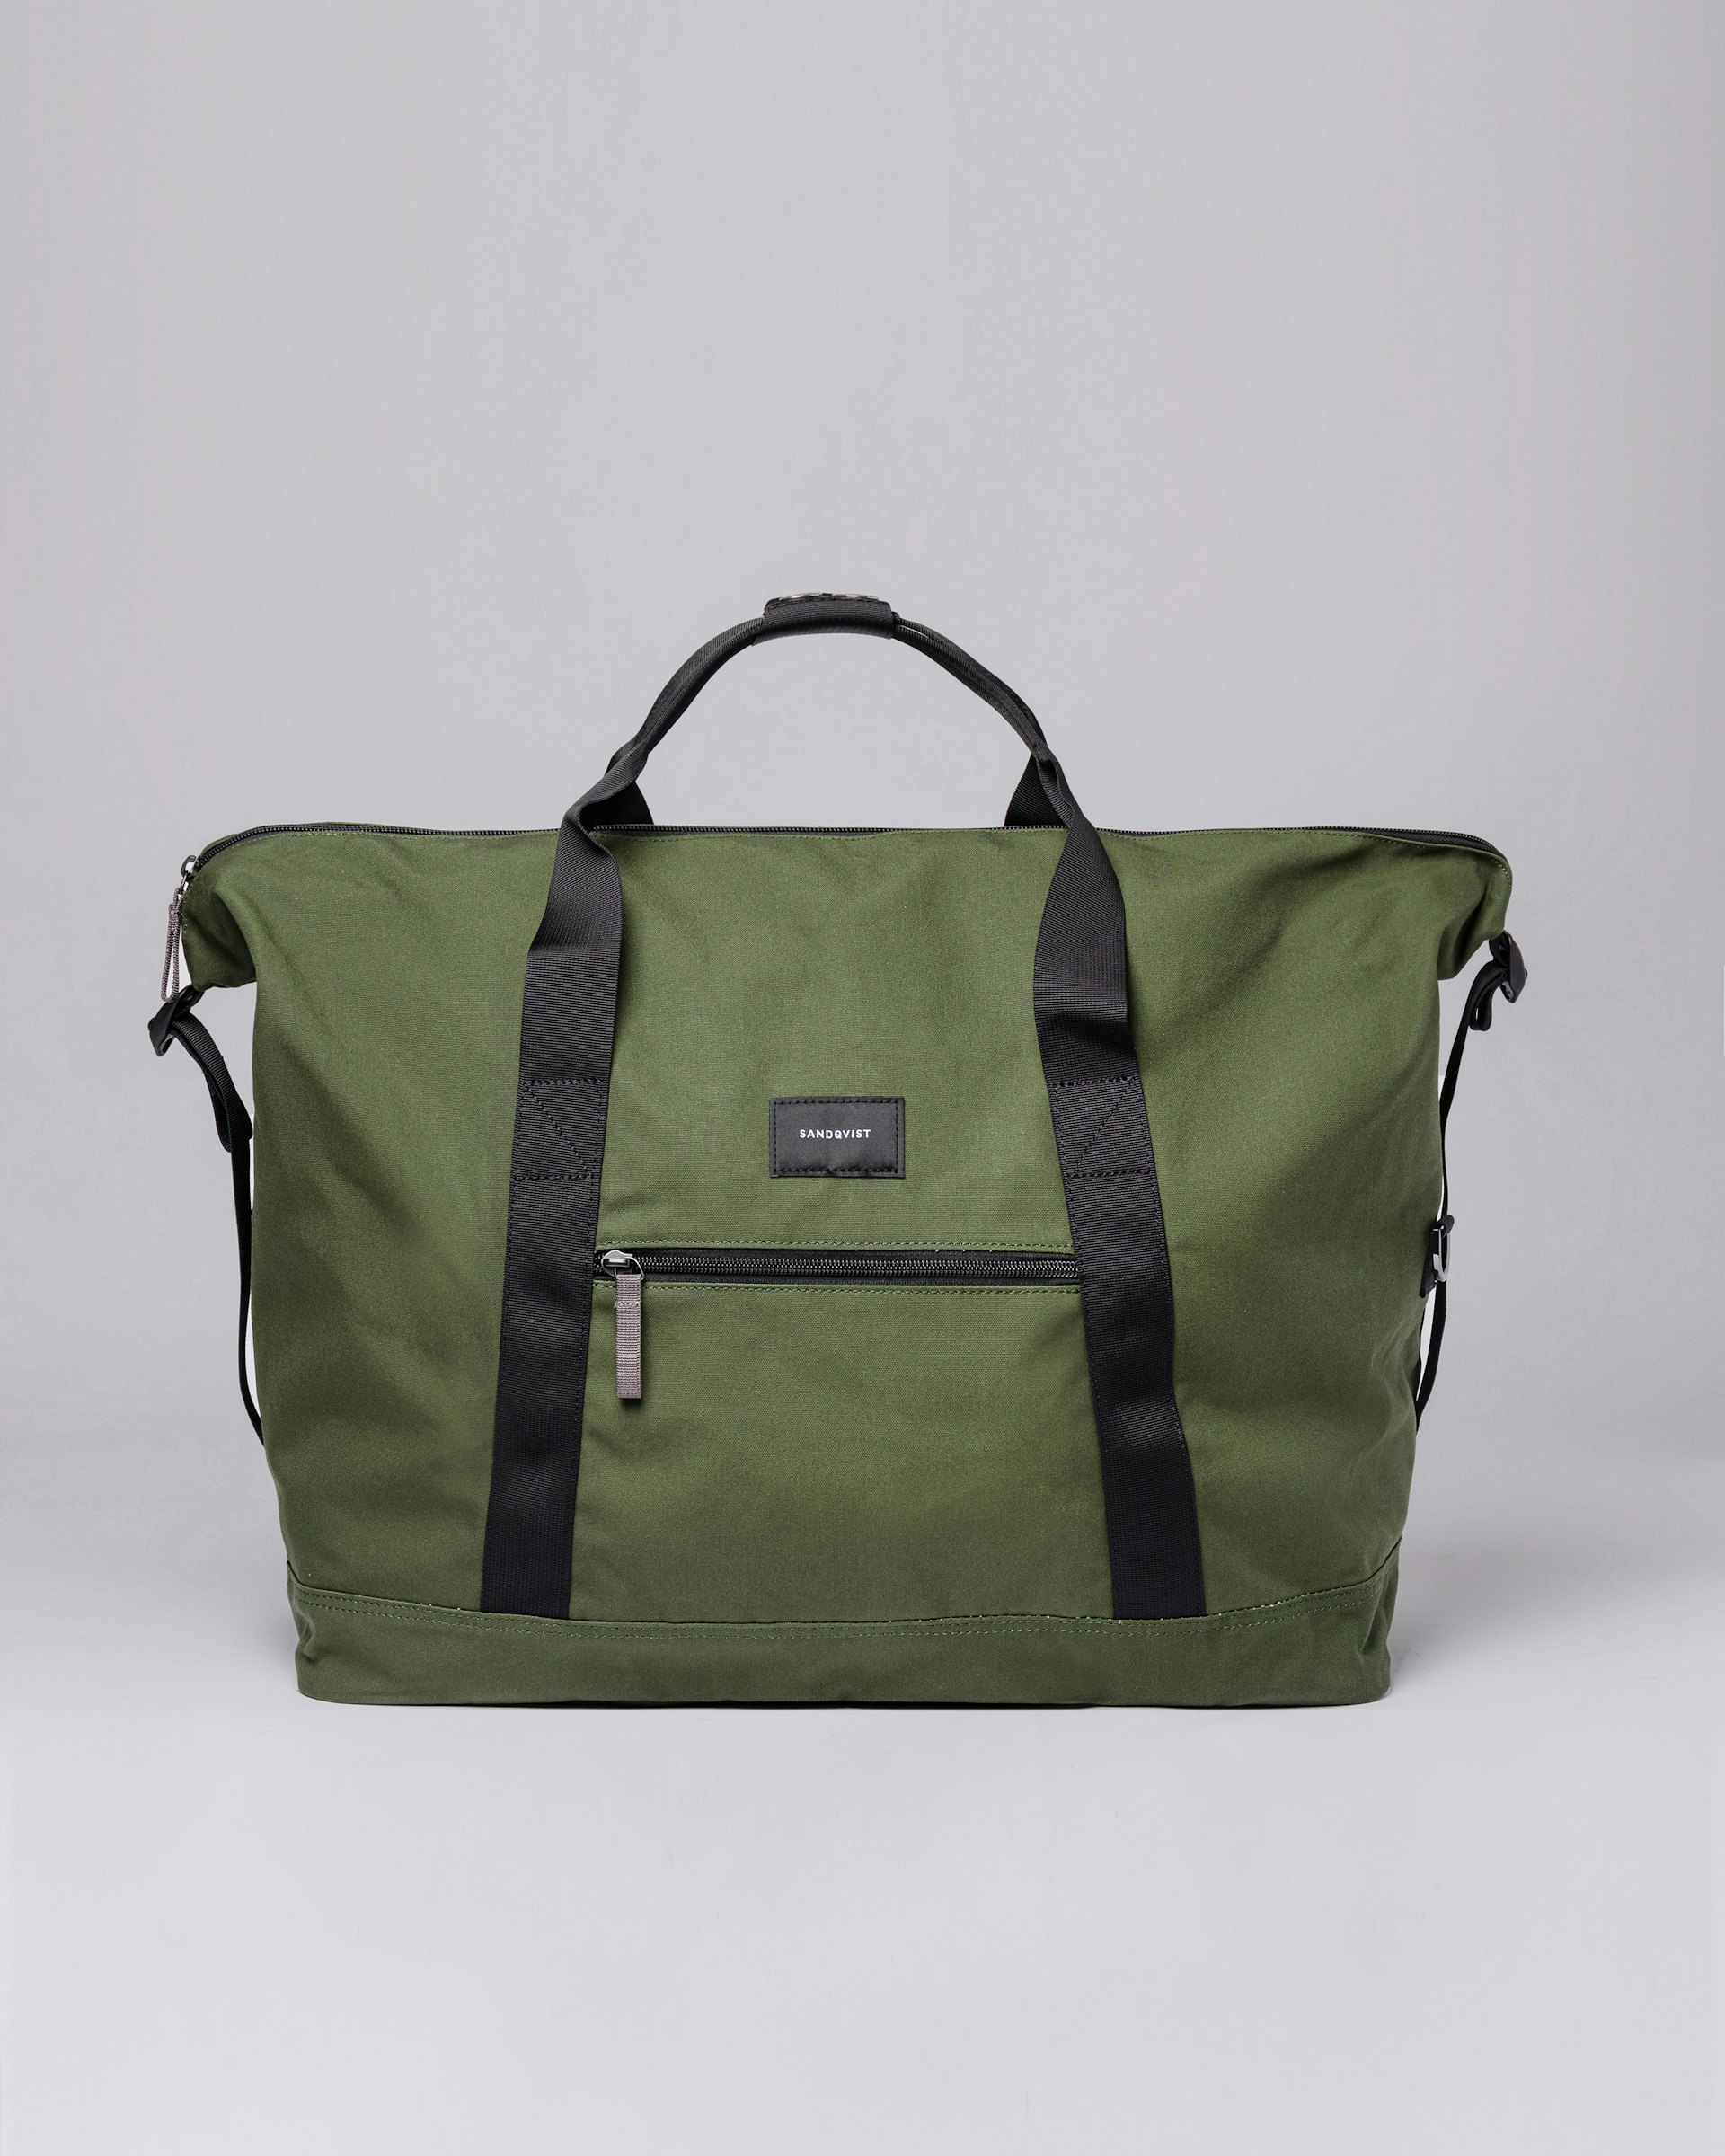 Sture belongs to the category Briefcases and is in color dawn green (1 of 5)